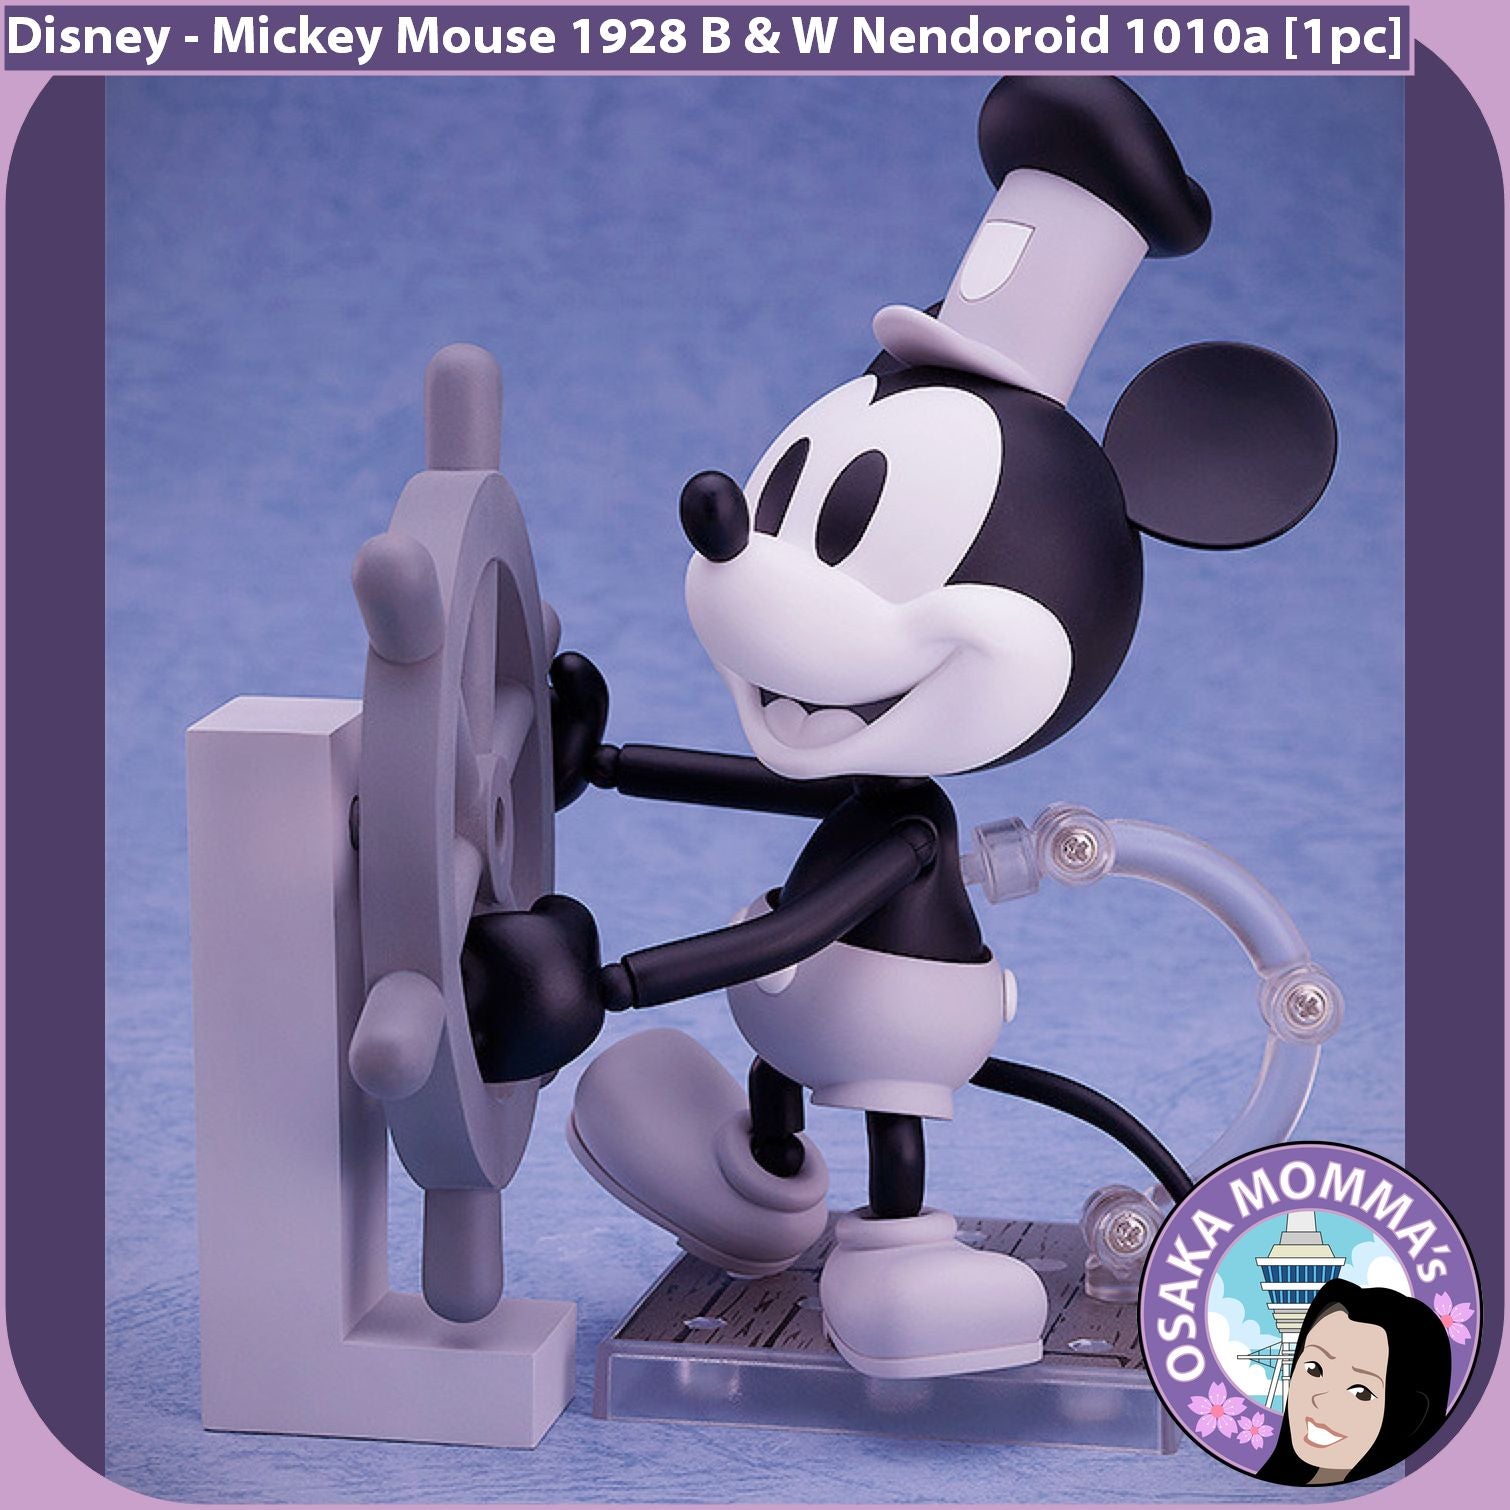 Mickey Mouse 1928 Version Nendoroid 1010